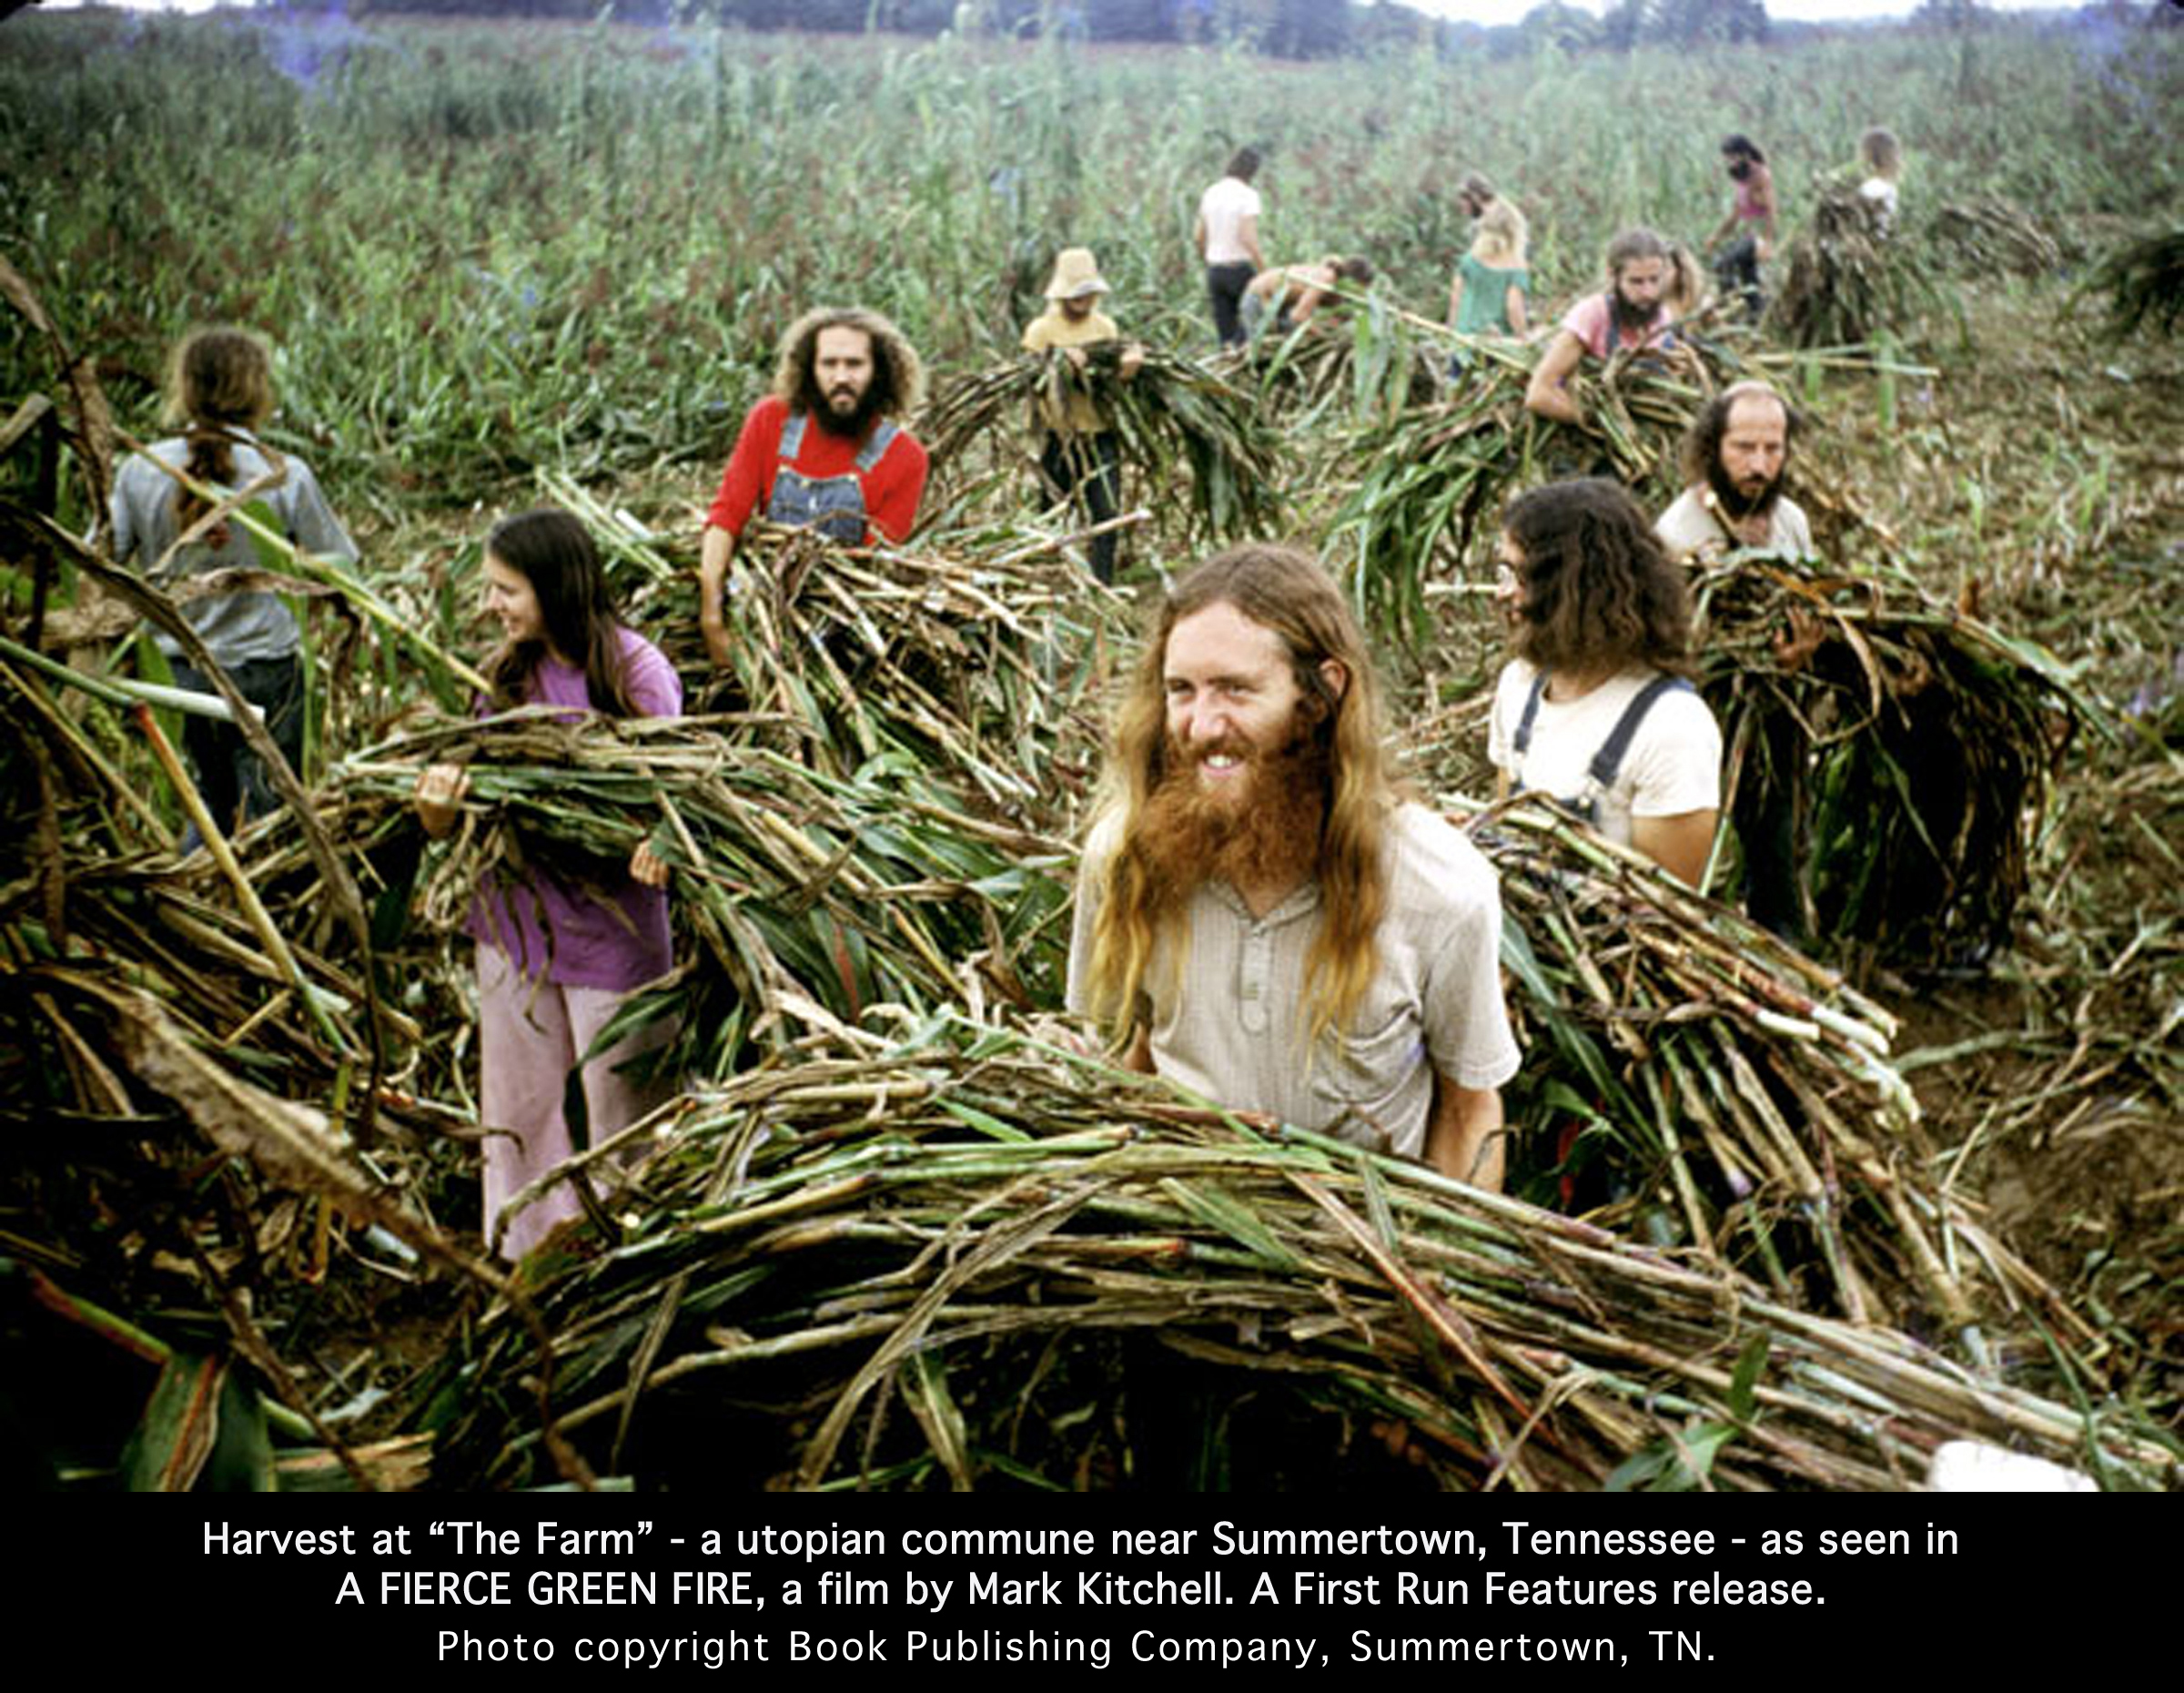 Tennessee communards gather their crop in the early '70s.David Frohman/Book Publishing Co./First Run Features